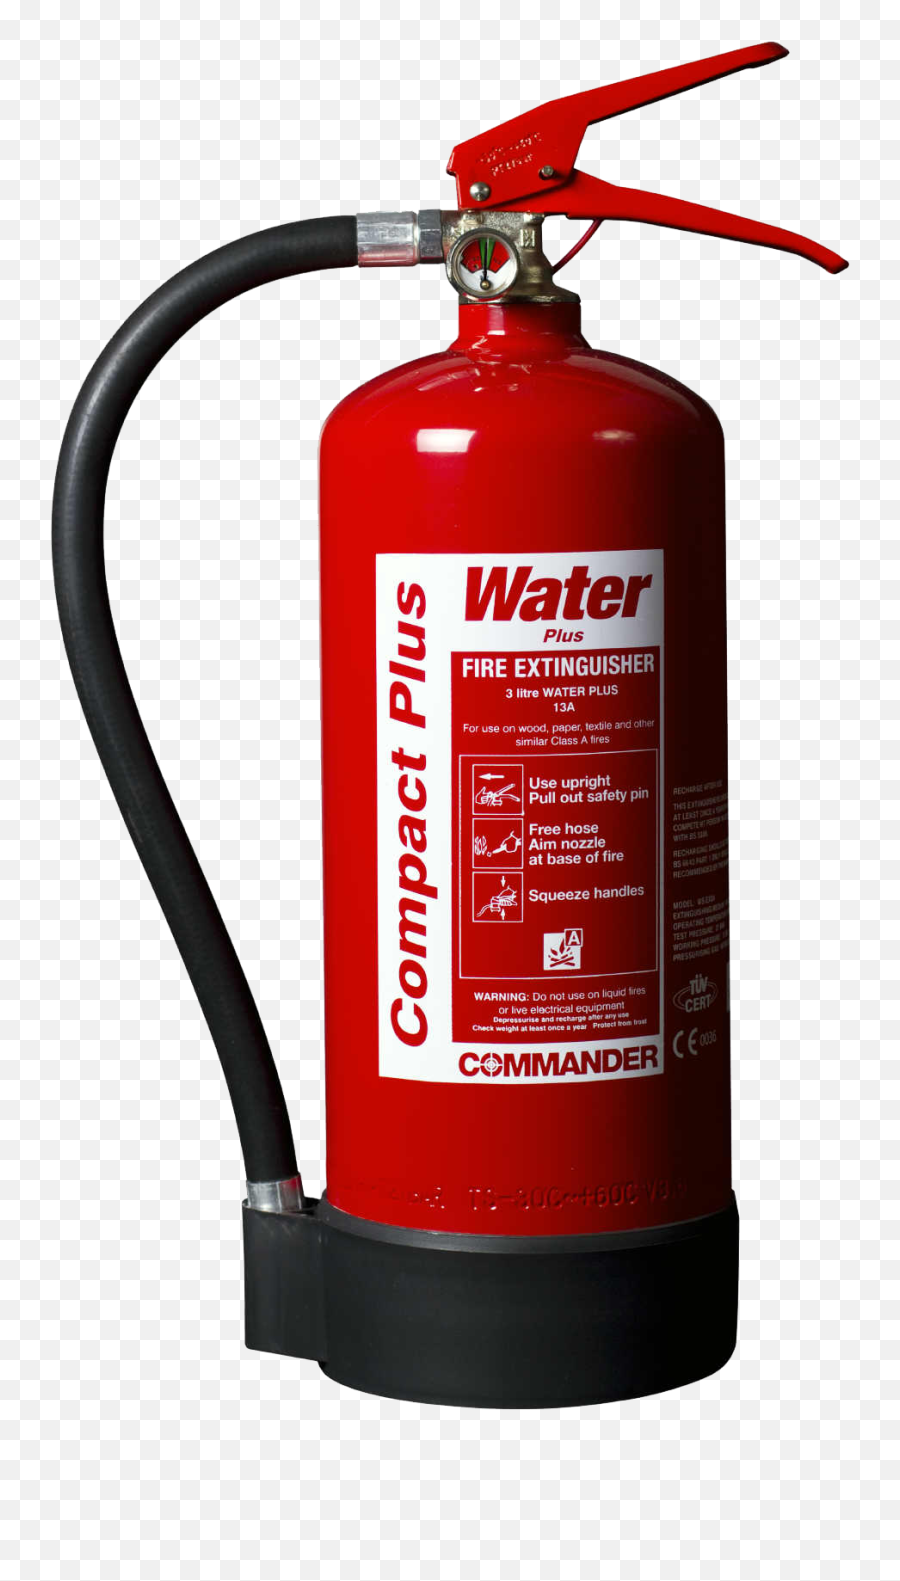 Fire Extinguisher - Fire Extinguisher Png Transparent,Fire Extinguisher Png